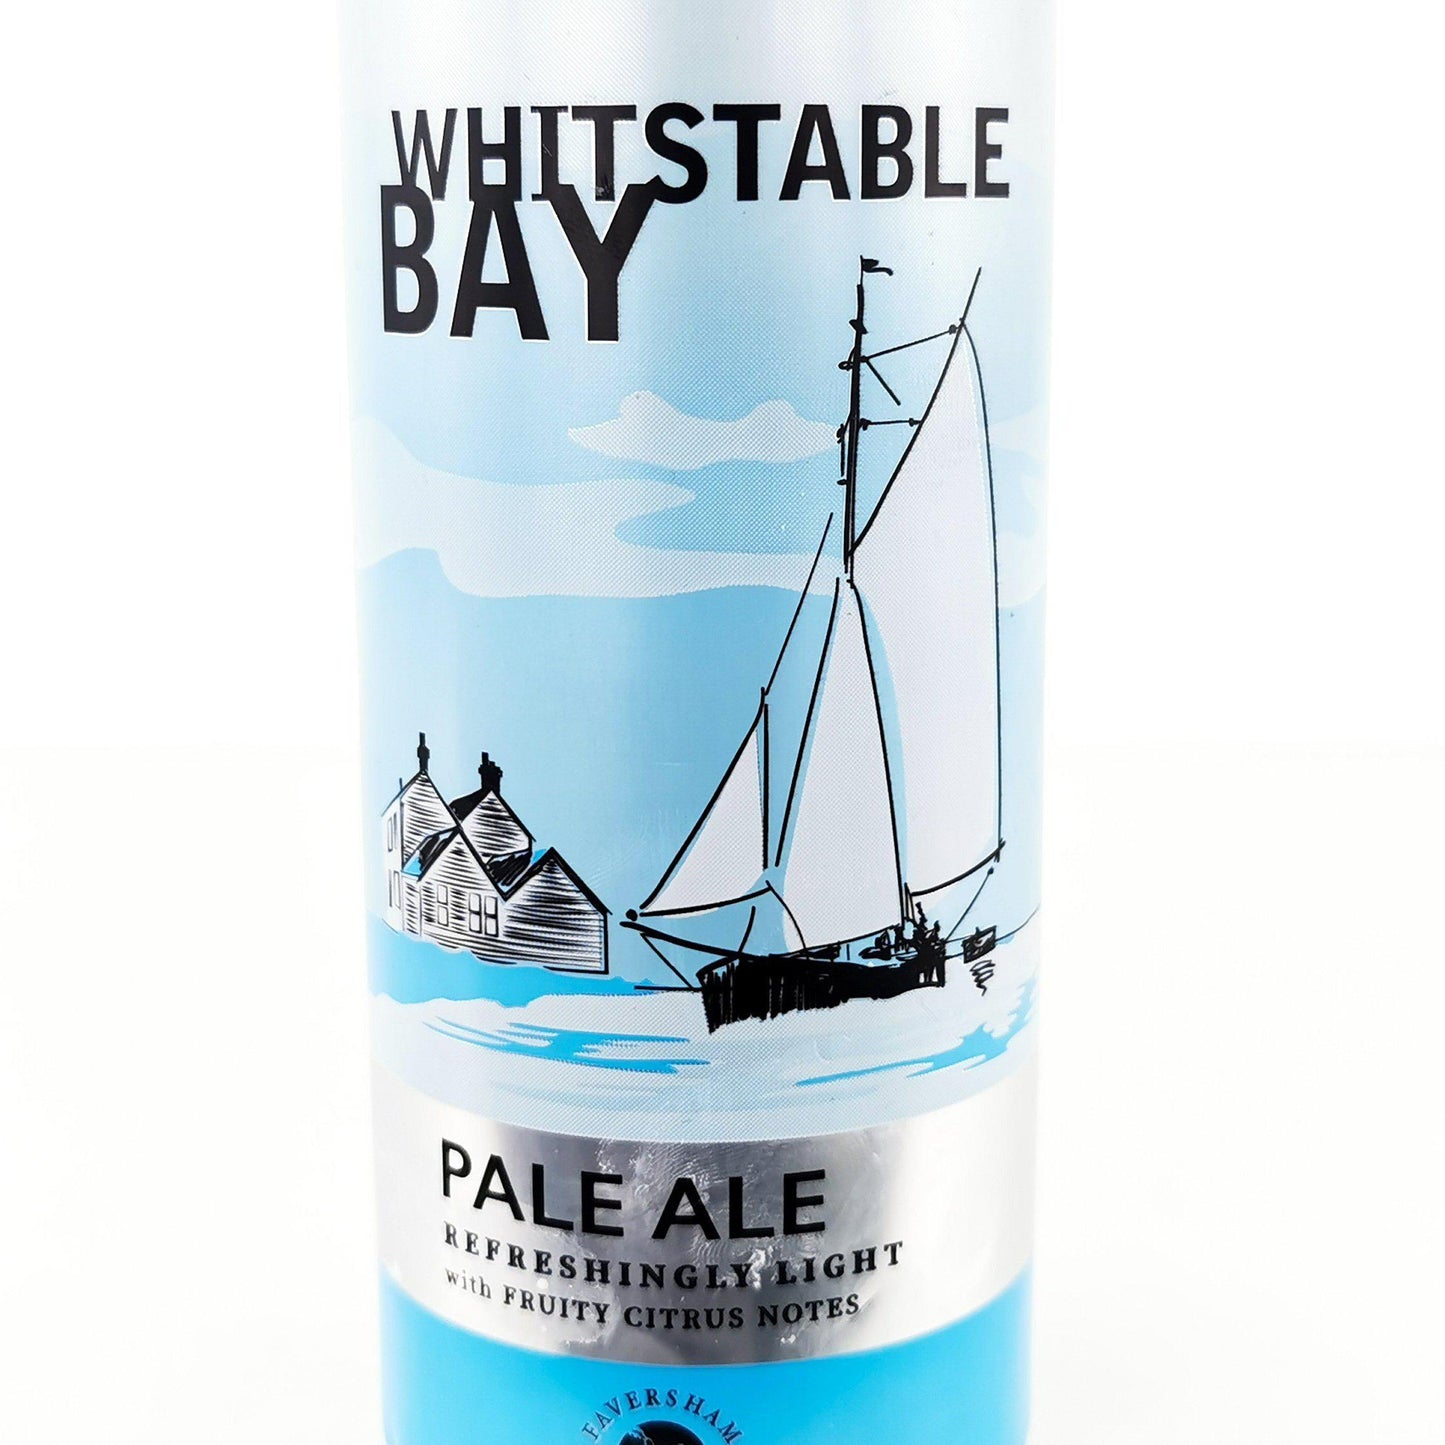 Whitstable Bay Craft Beer Can Candle-Beer Can Candles-Adhock Homeware